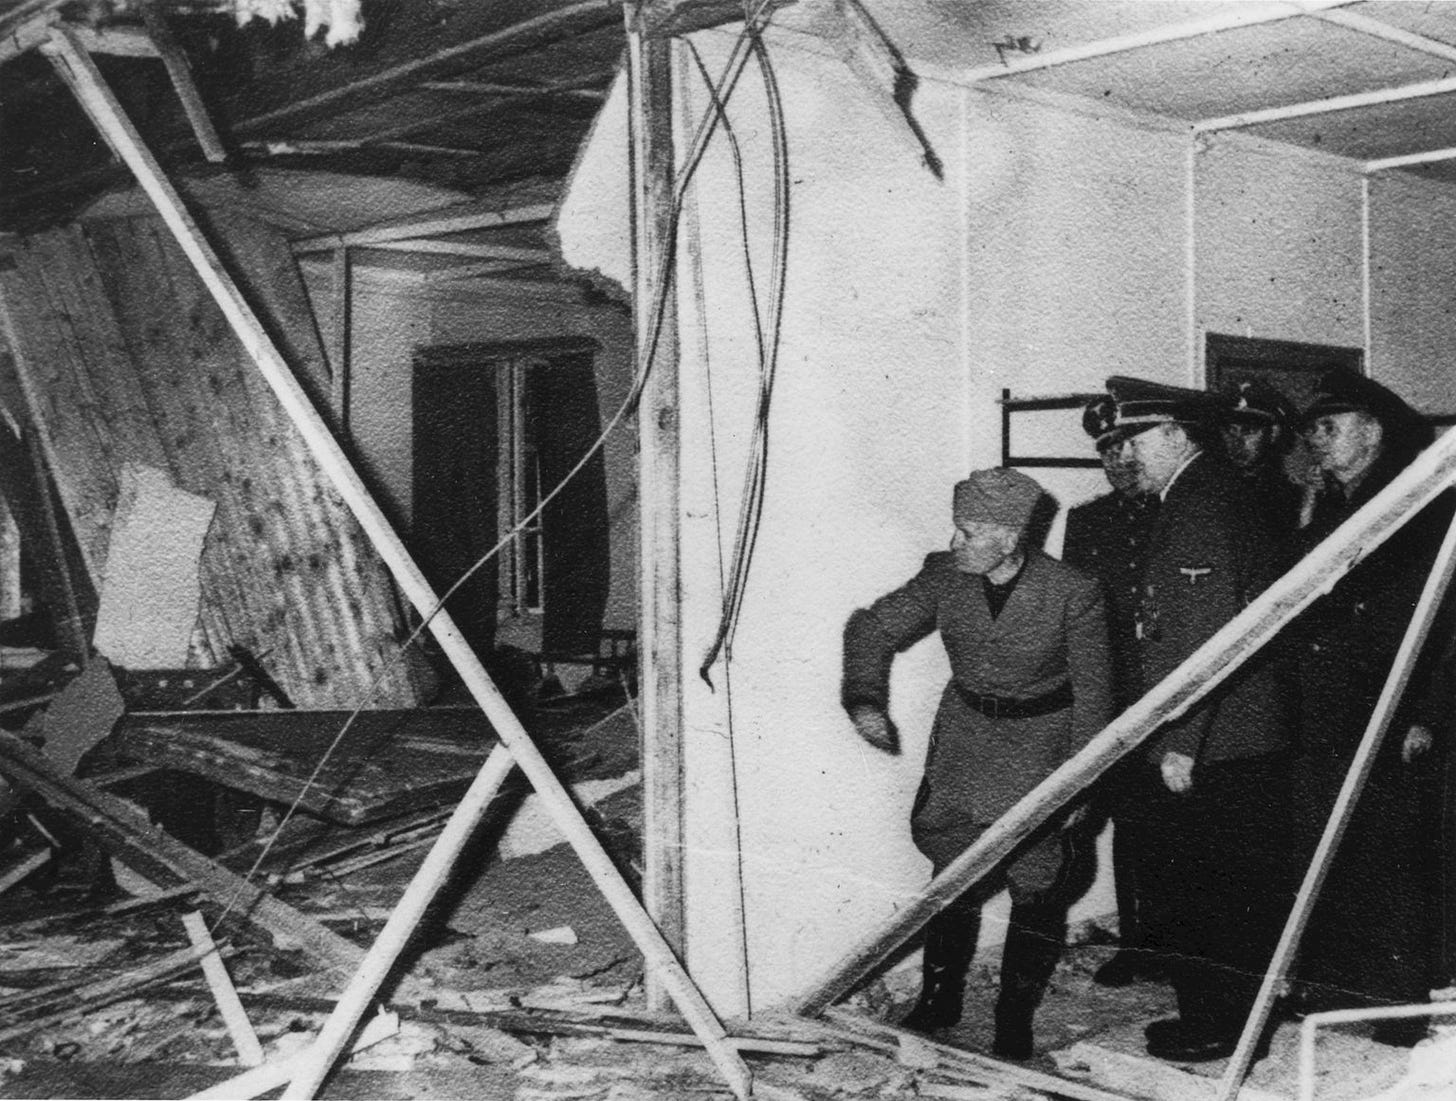 After the attempt on his life, Hitler shows Mussolini the room where the bomb went off. Wolf’s Lair Führer Headquarters (near Gierłoż, Poland), 20 July 1944.